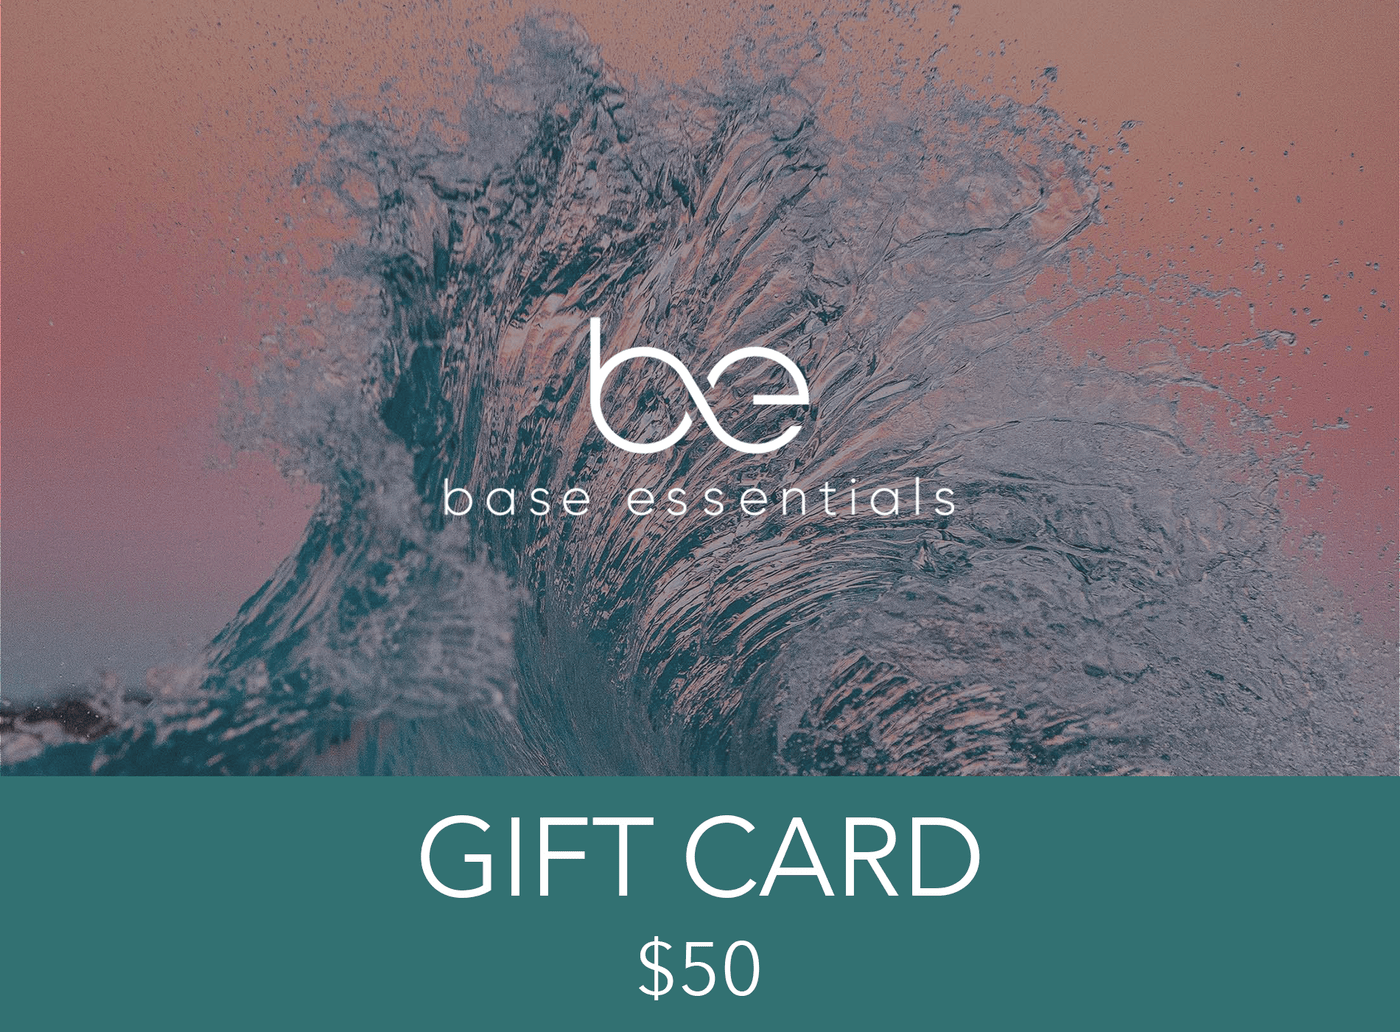 Base Essentials Gift Cards A$50.00 Base Essentials Gift Card